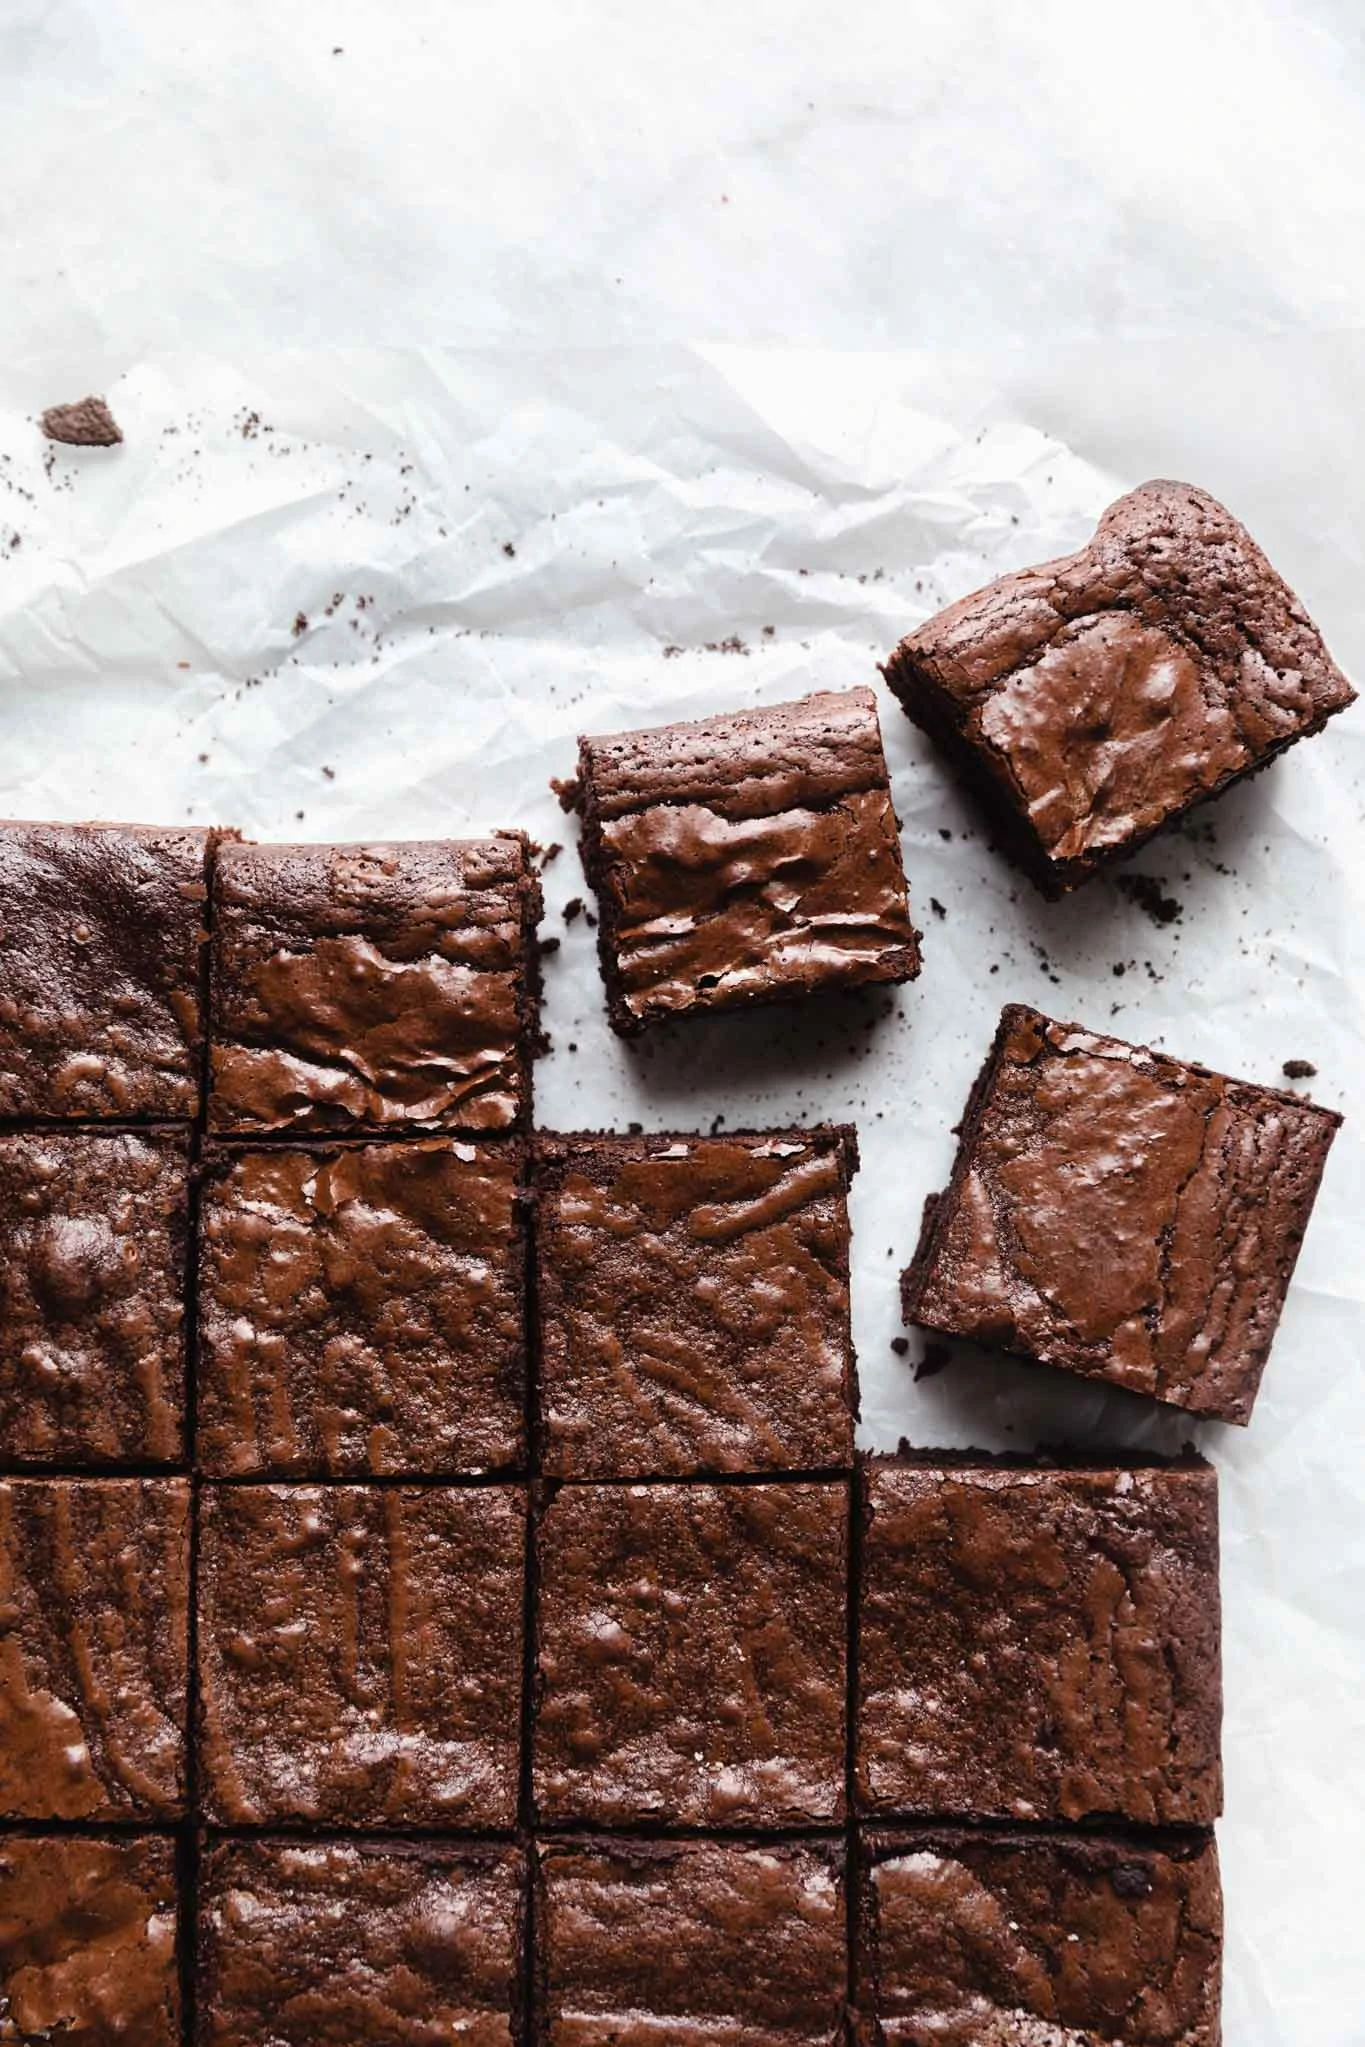 Fudgy AND cakey brownies to satisfy anyone's craving. This step by step recipe breaks down exactly how to make the best brownie ever.